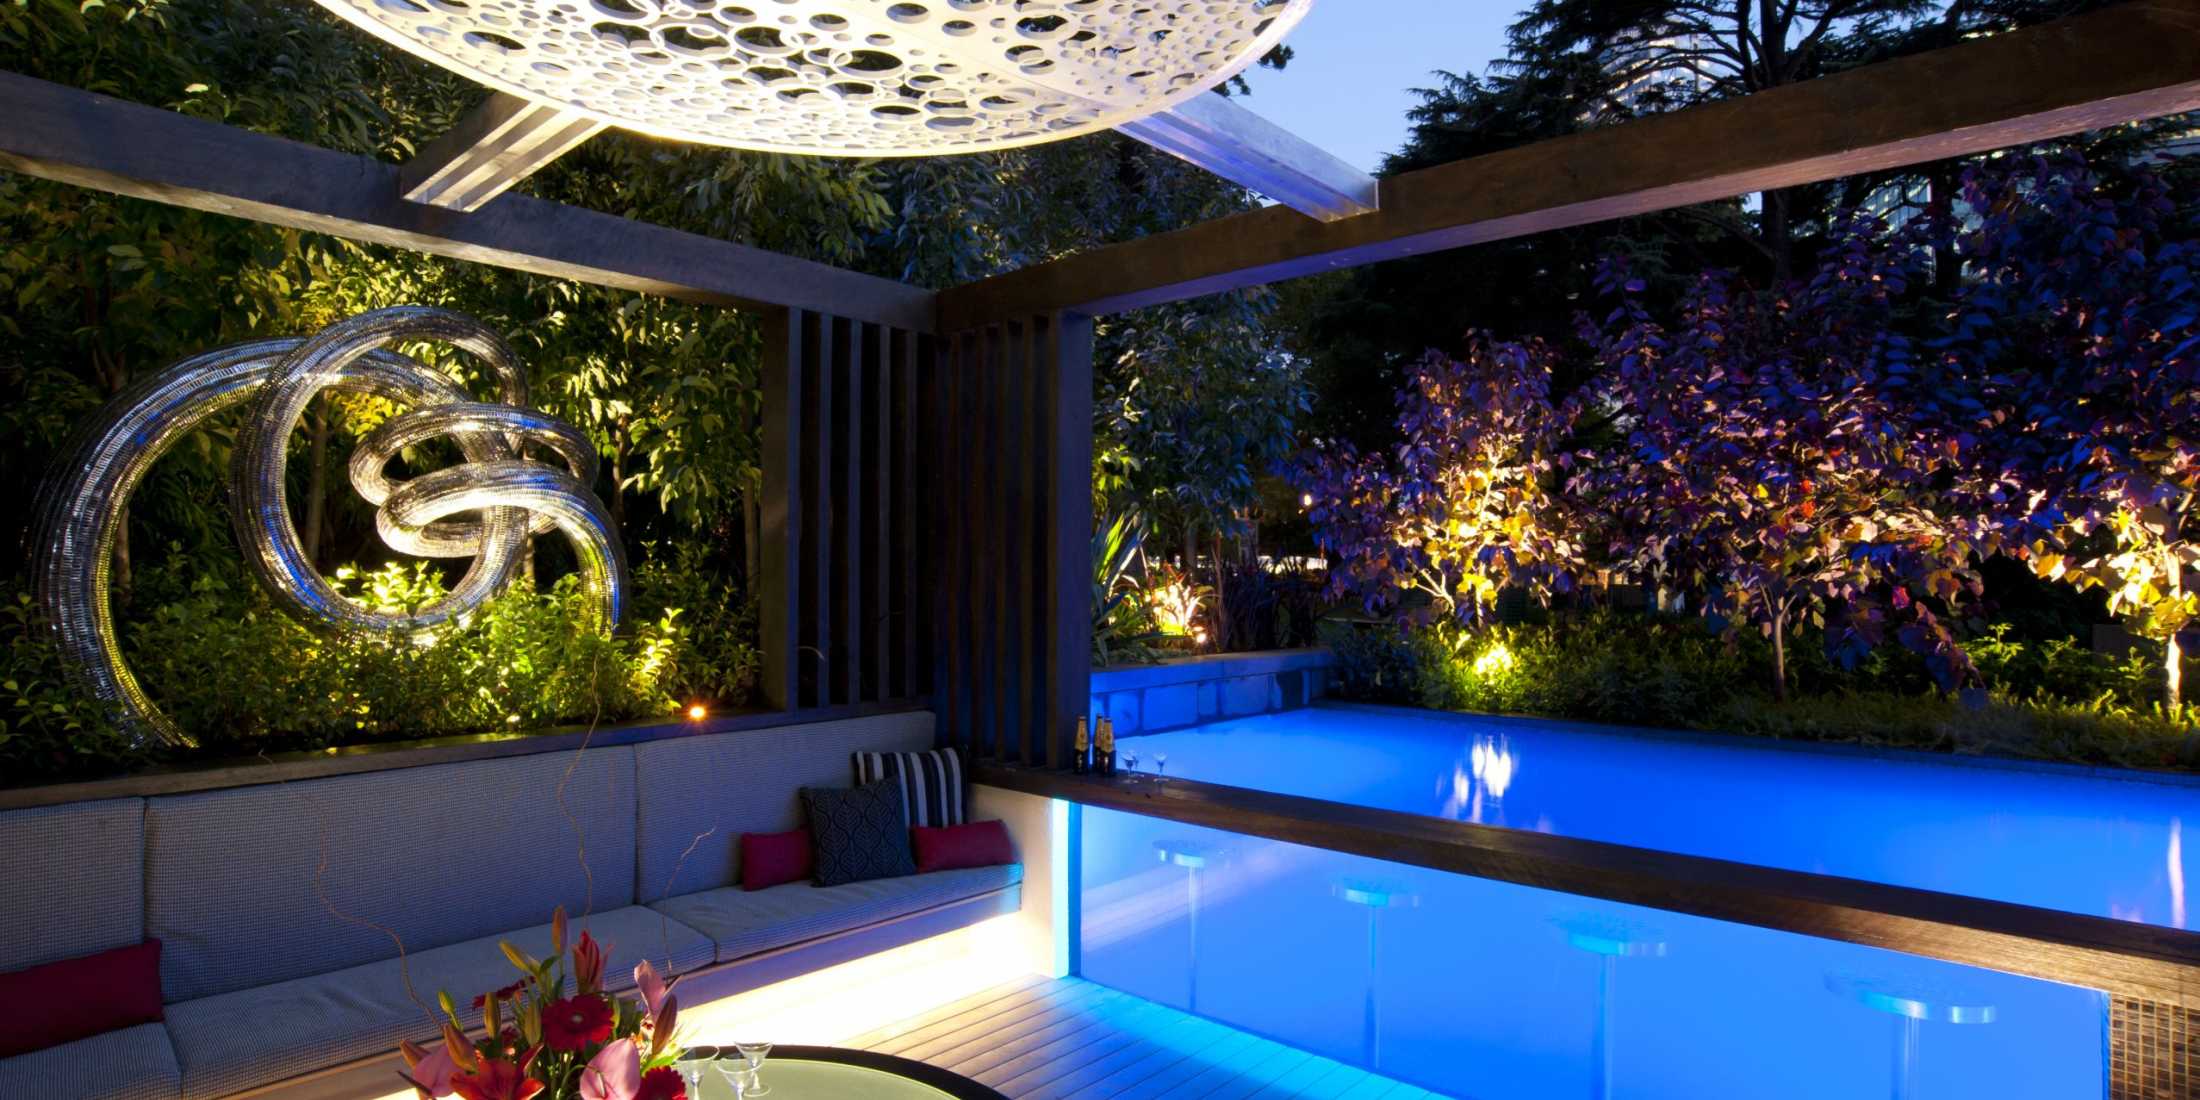 5 tips for a sparkling pool